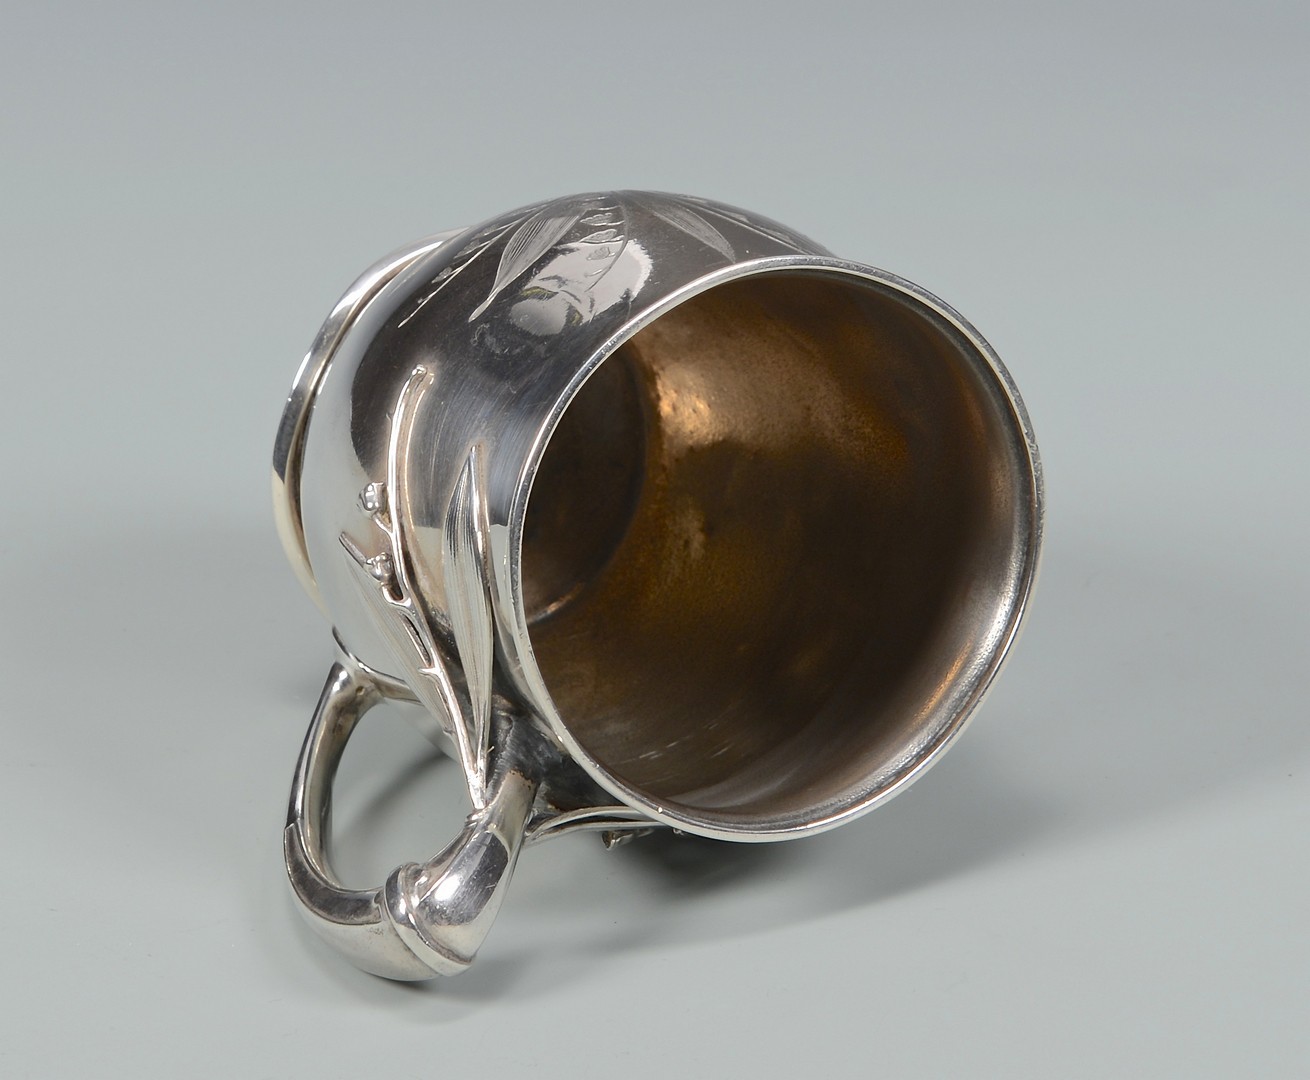 Lot 73: Aesthetic Silver Cup, S. Cockrell